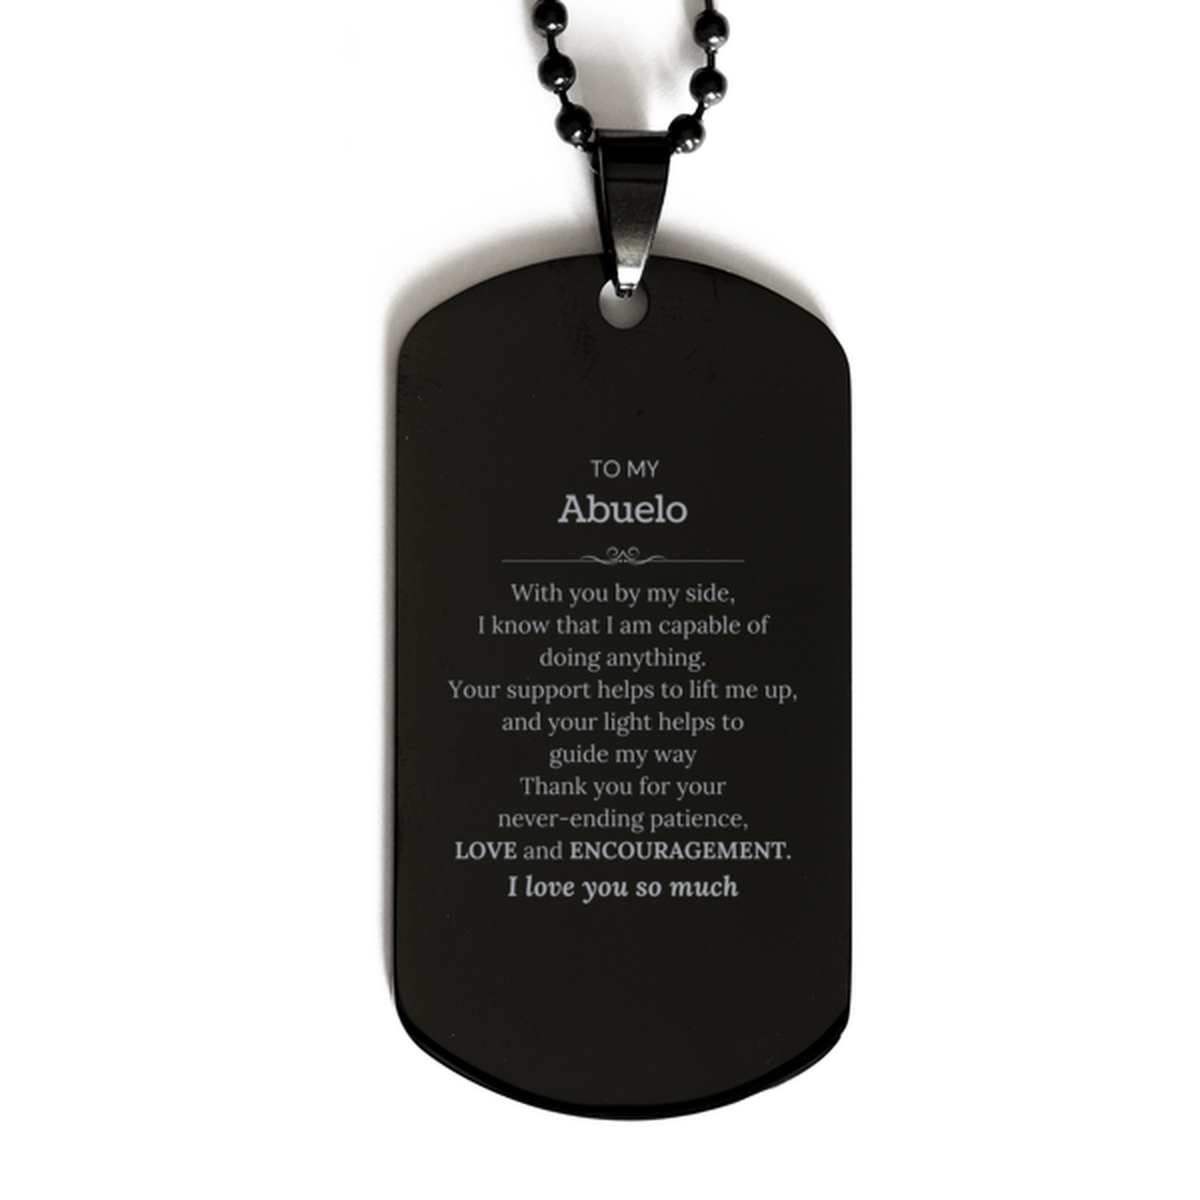 Appreciation Abuelo Black Dog Tag Gifts, To My Abuelo Birthday Christmas Wedding Keepsake Gifts for Abuelo With you by my side, I know that I am capable of doing anything. I love you so much